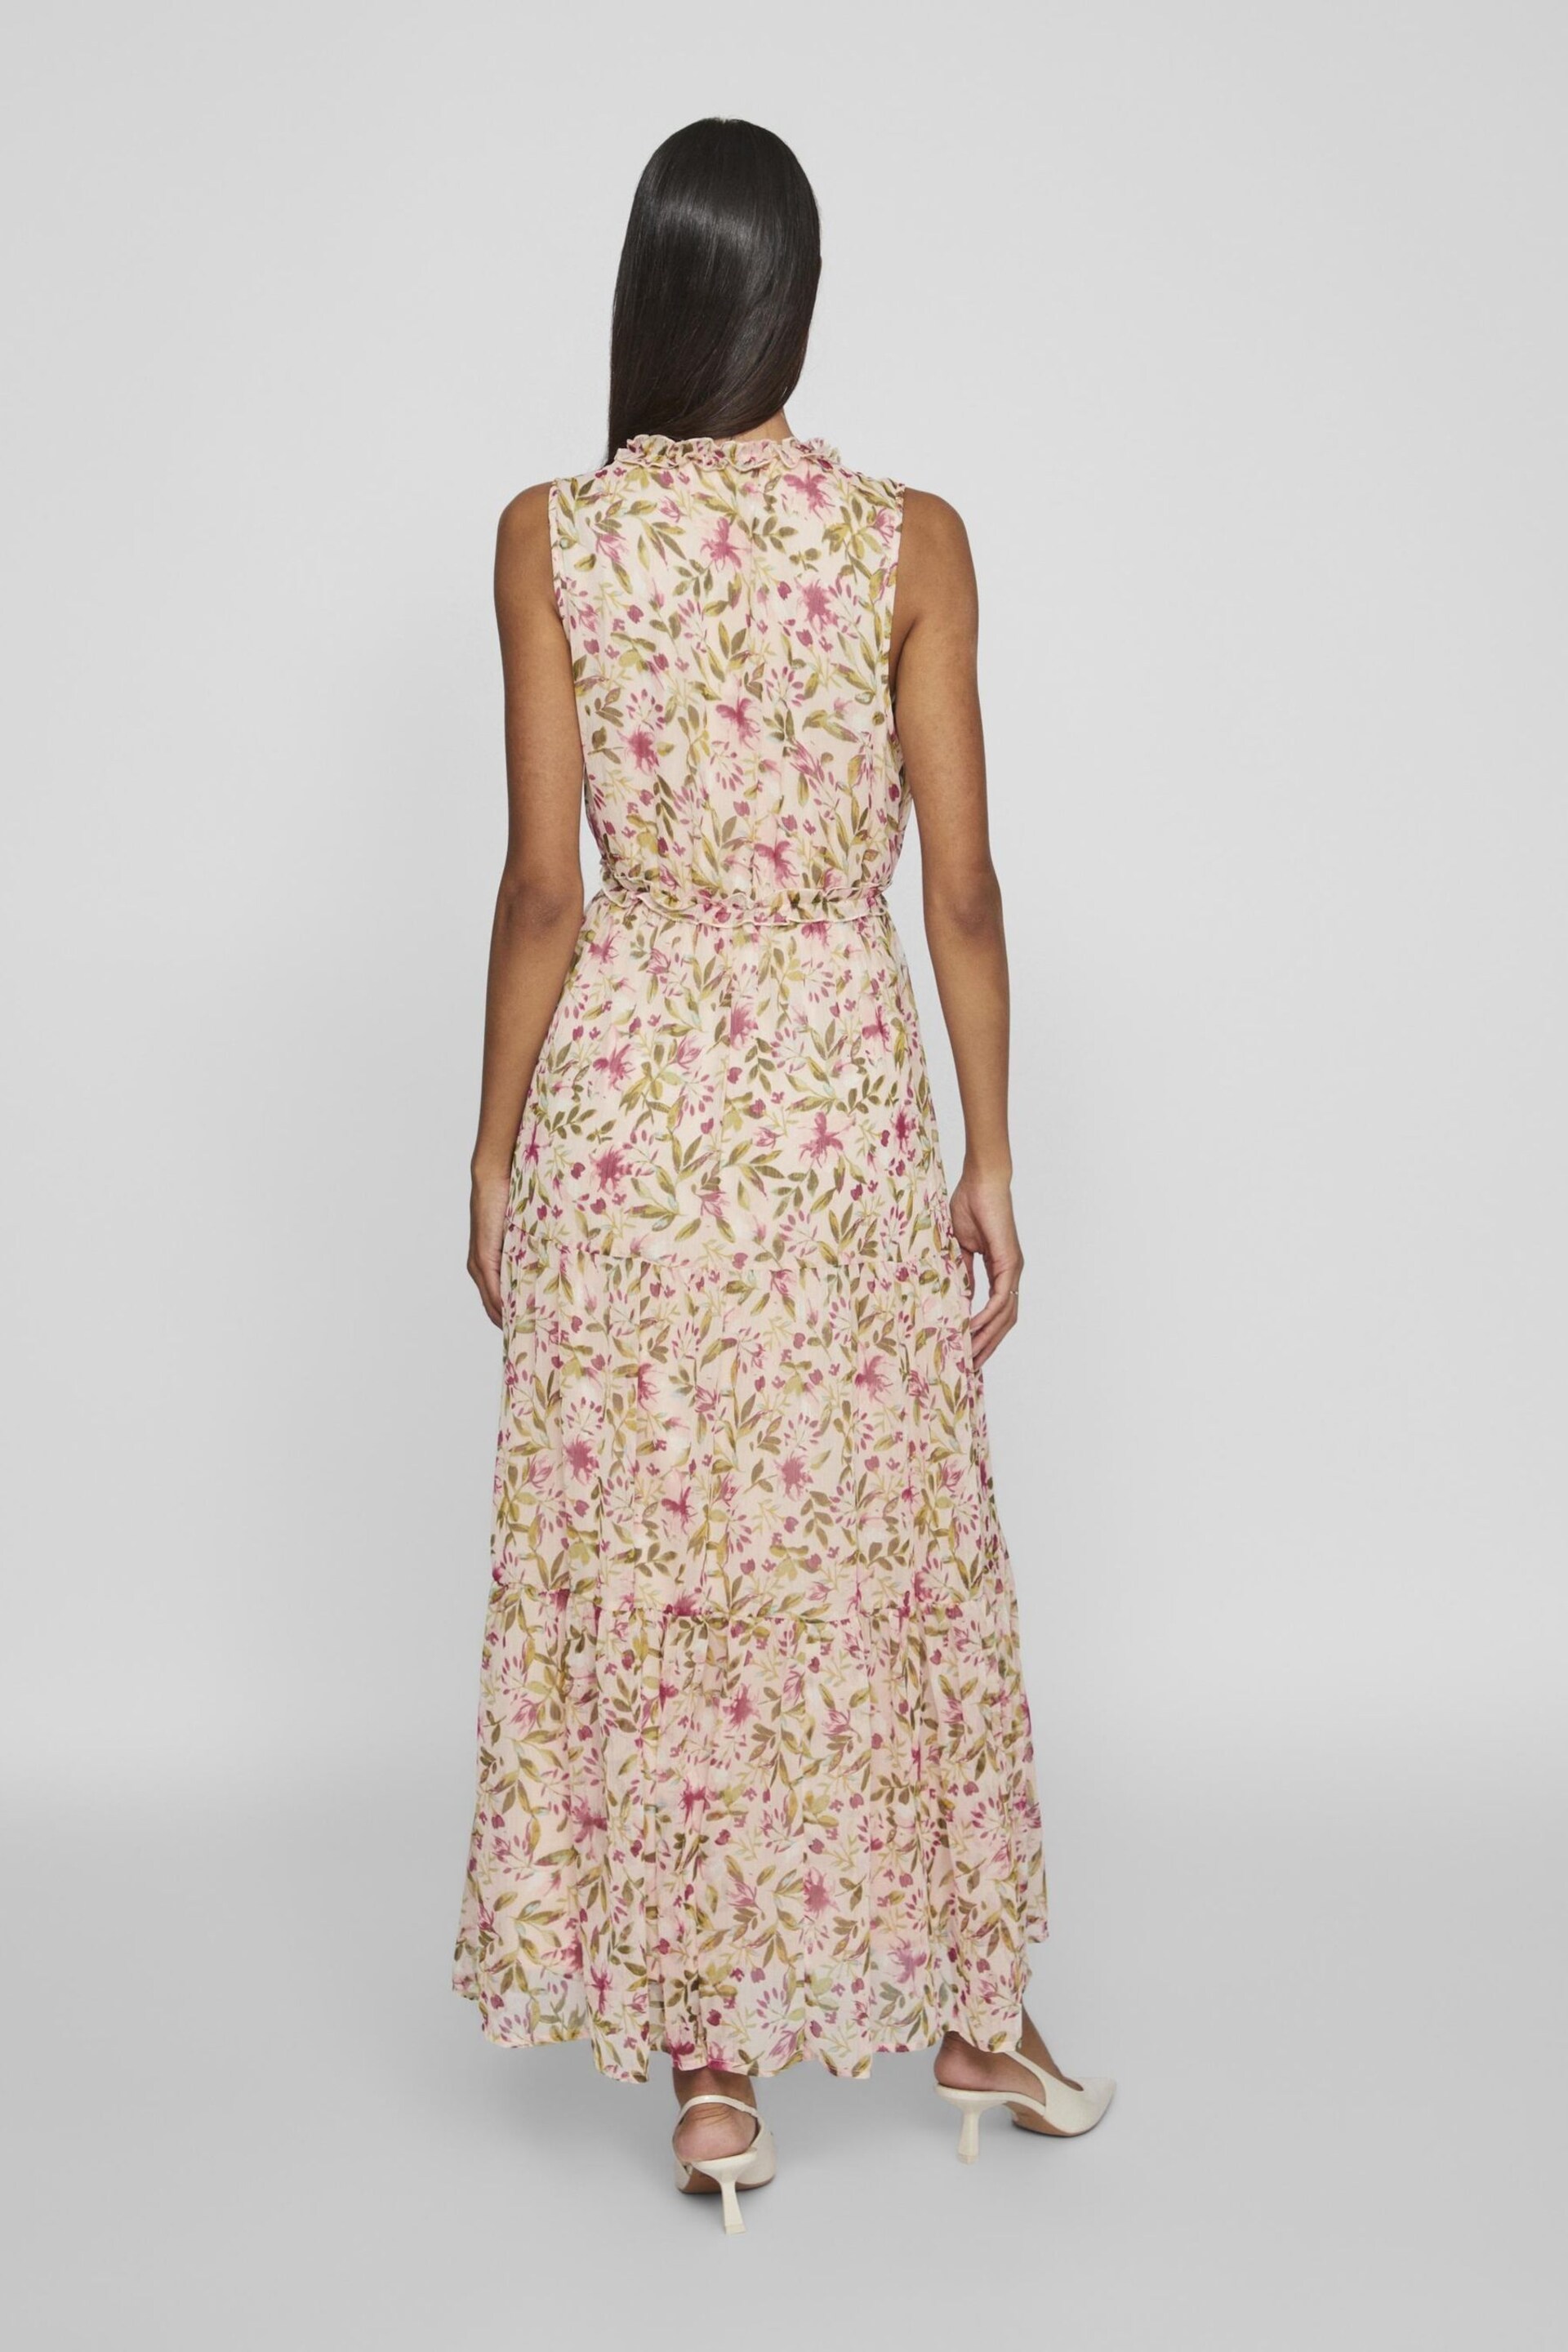 VILA Pink Floral Ruffle Tiered Maxi Occasion Dress - Image 2 of 4